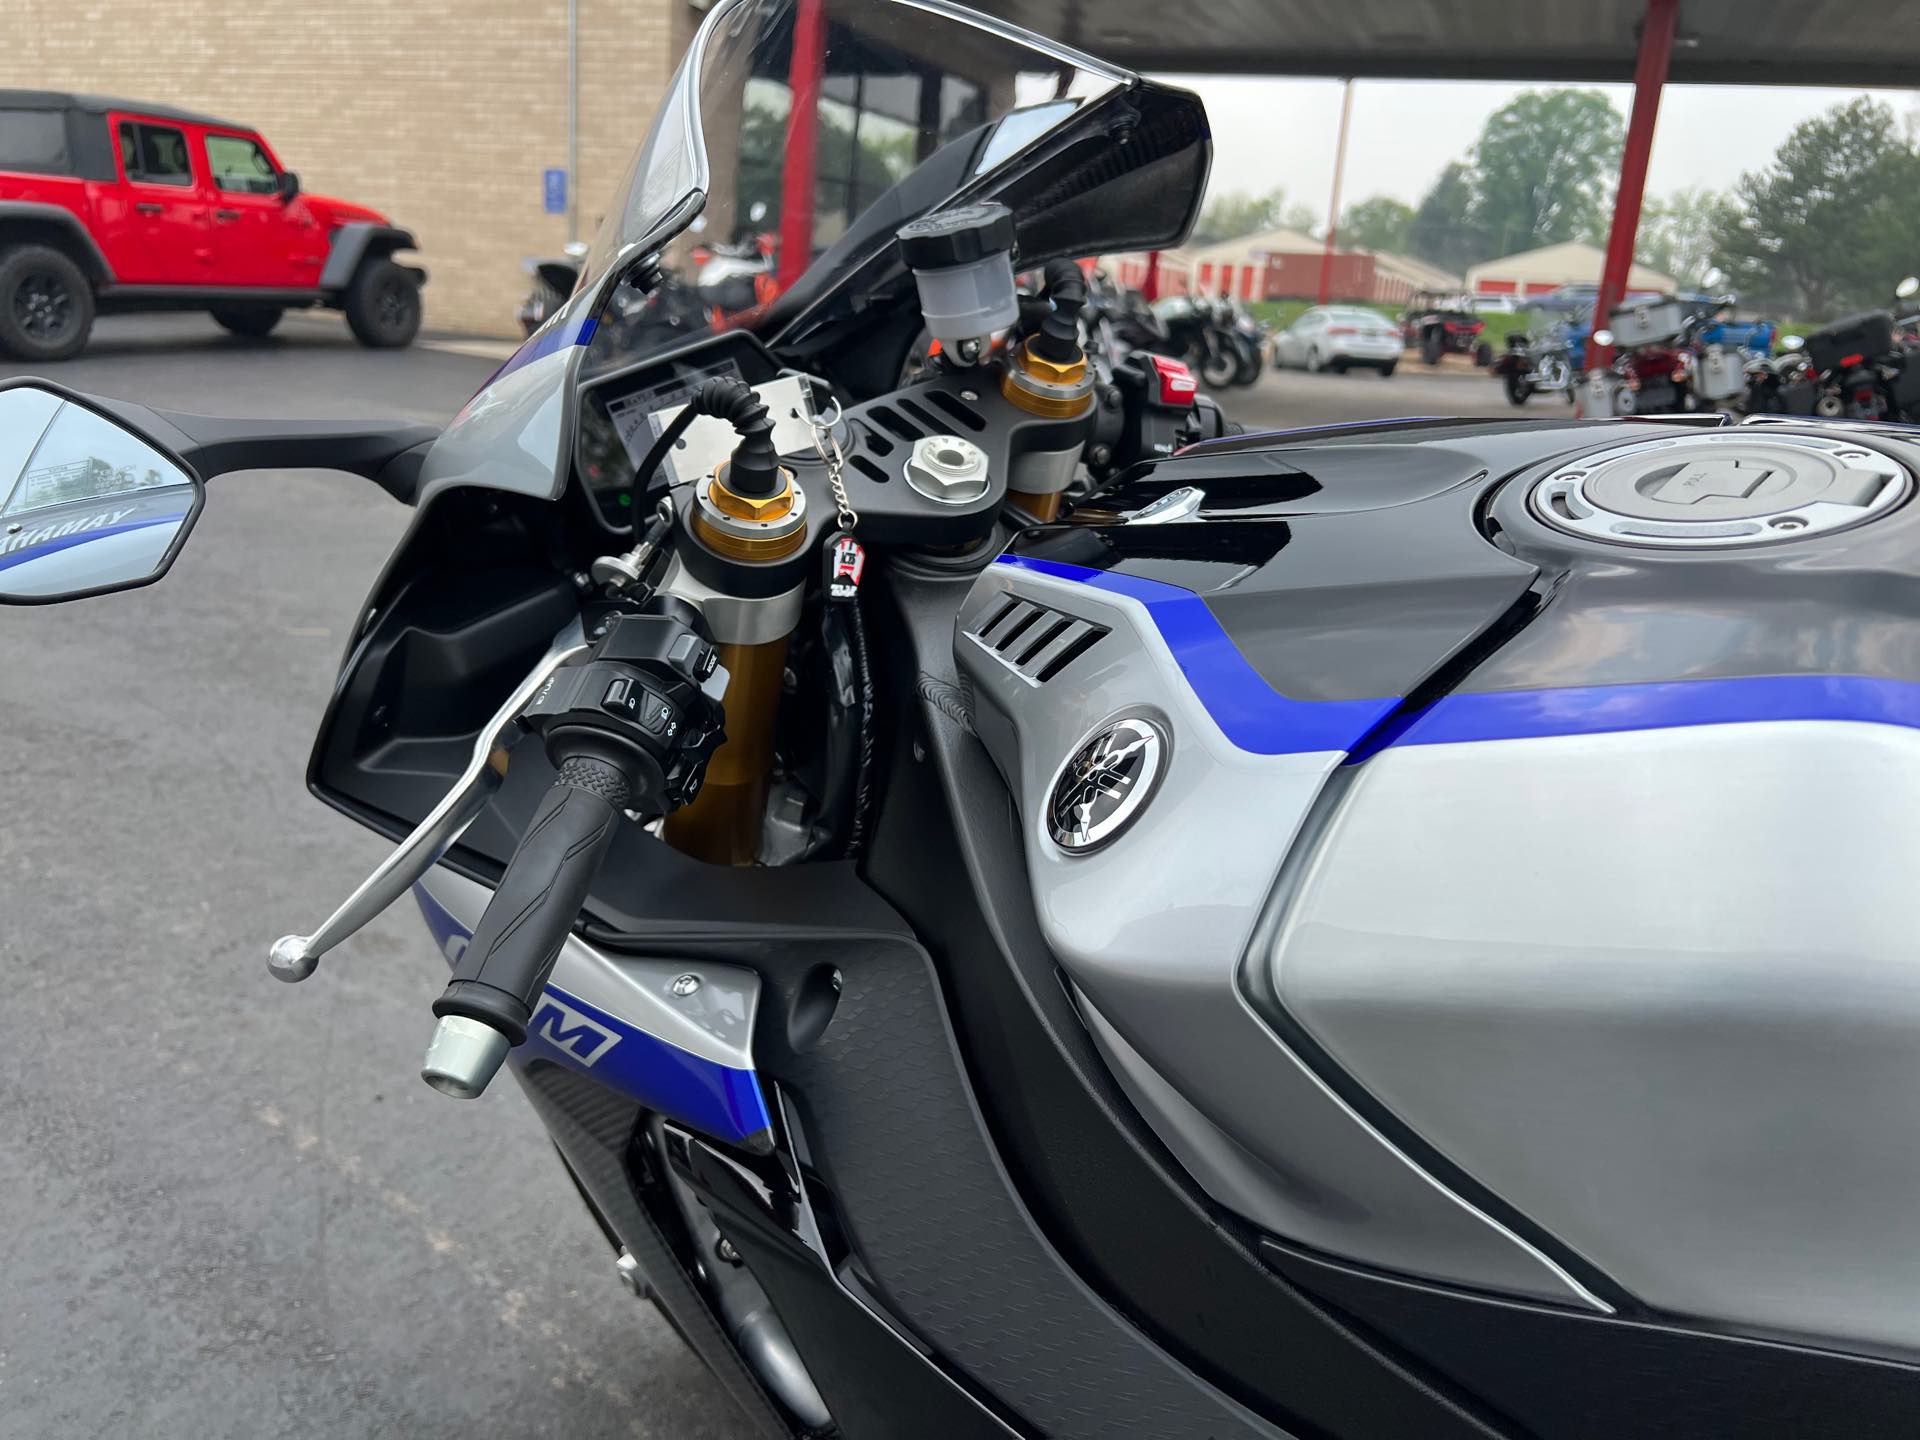 2018 Yamaha YZF R1M at Aces Motorcycles - Fort Collins